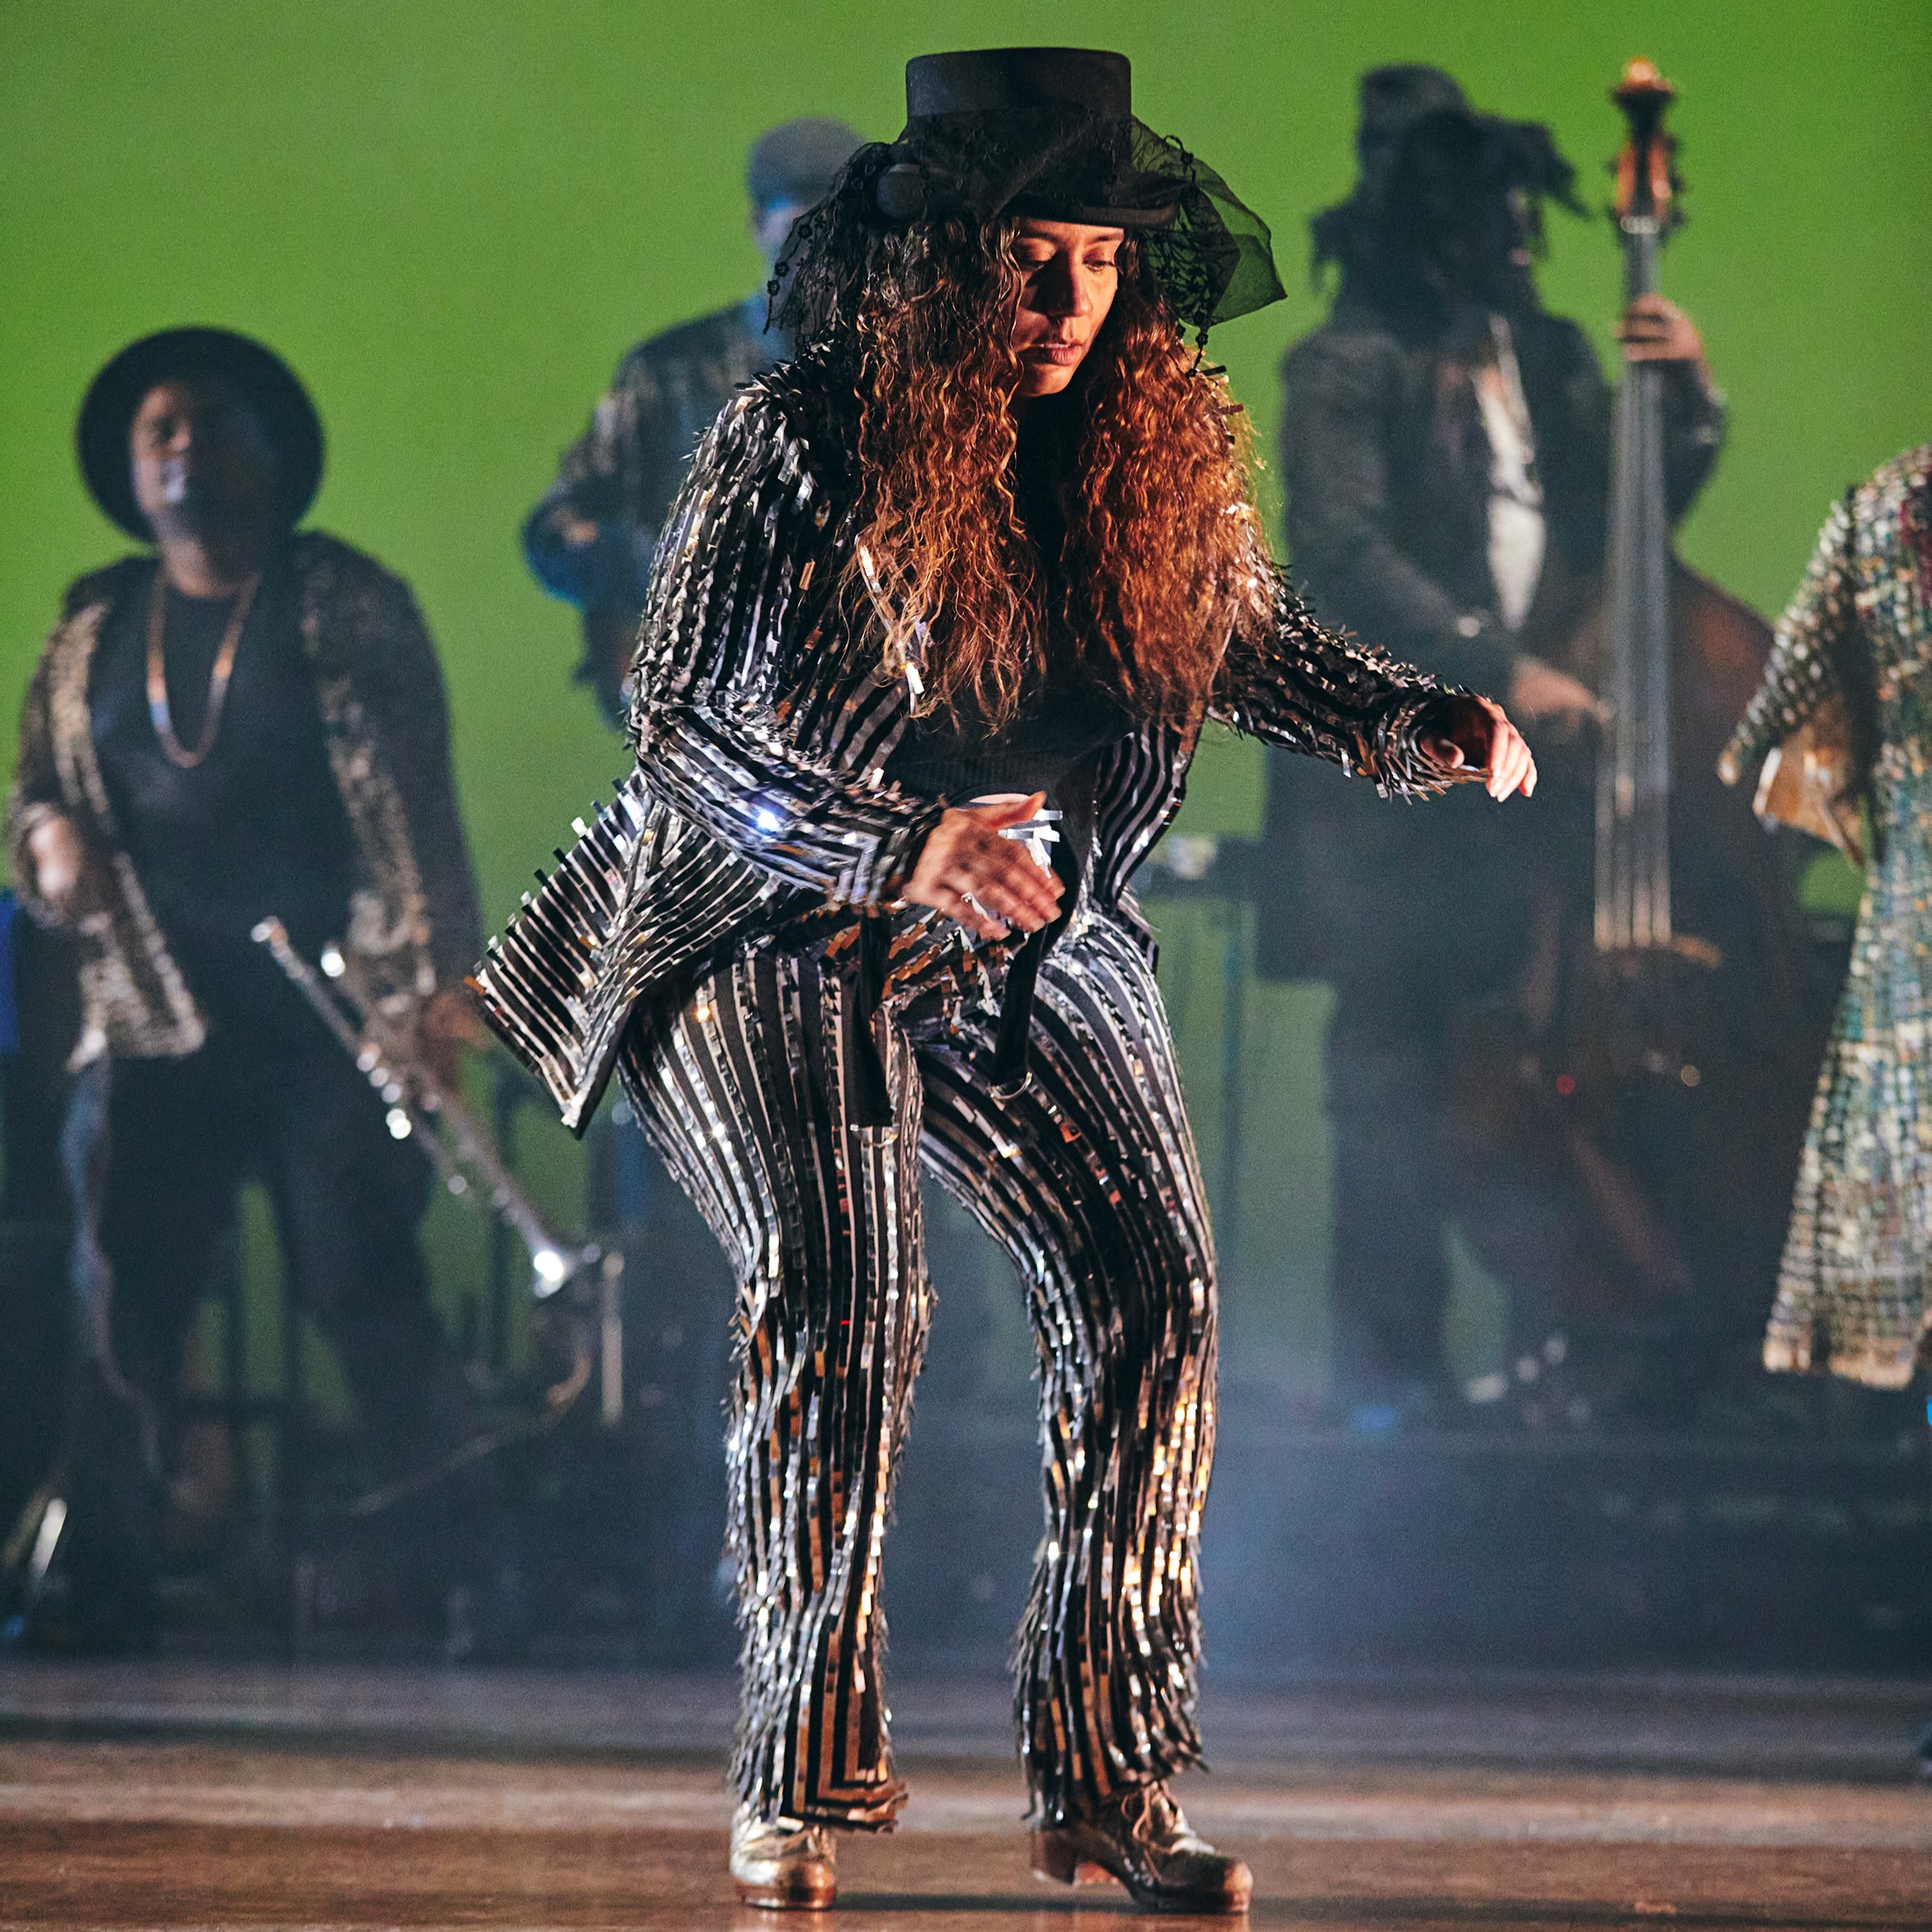 female dancer wearing black hat and striped suit dancing on stage